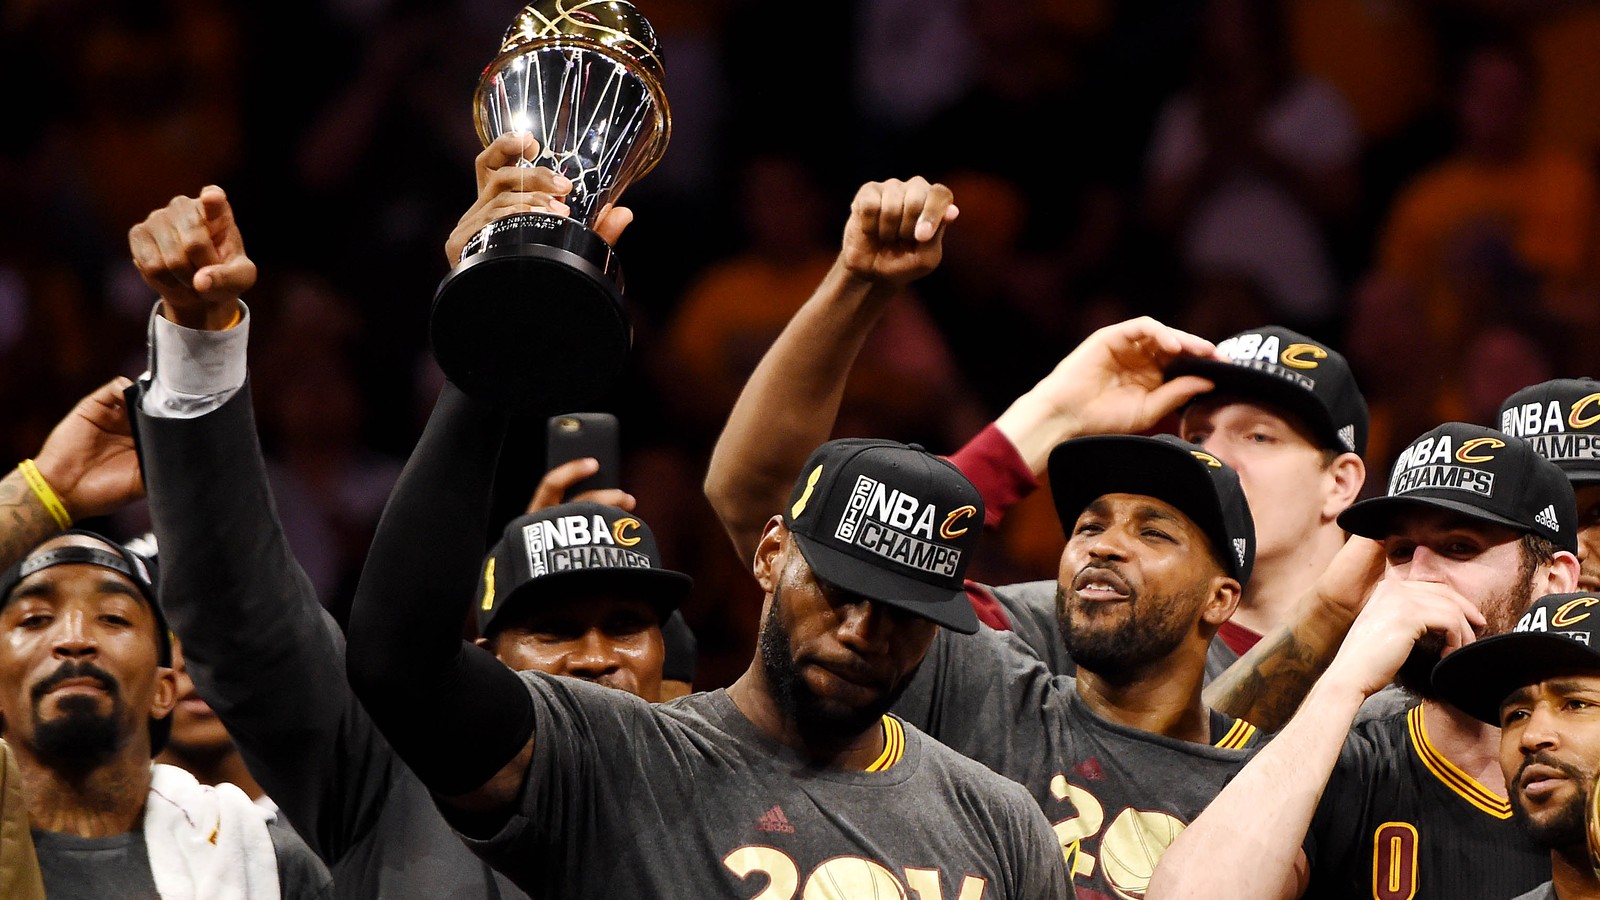 King's court: James, Cavs bring NBA Finals title to Cleveland